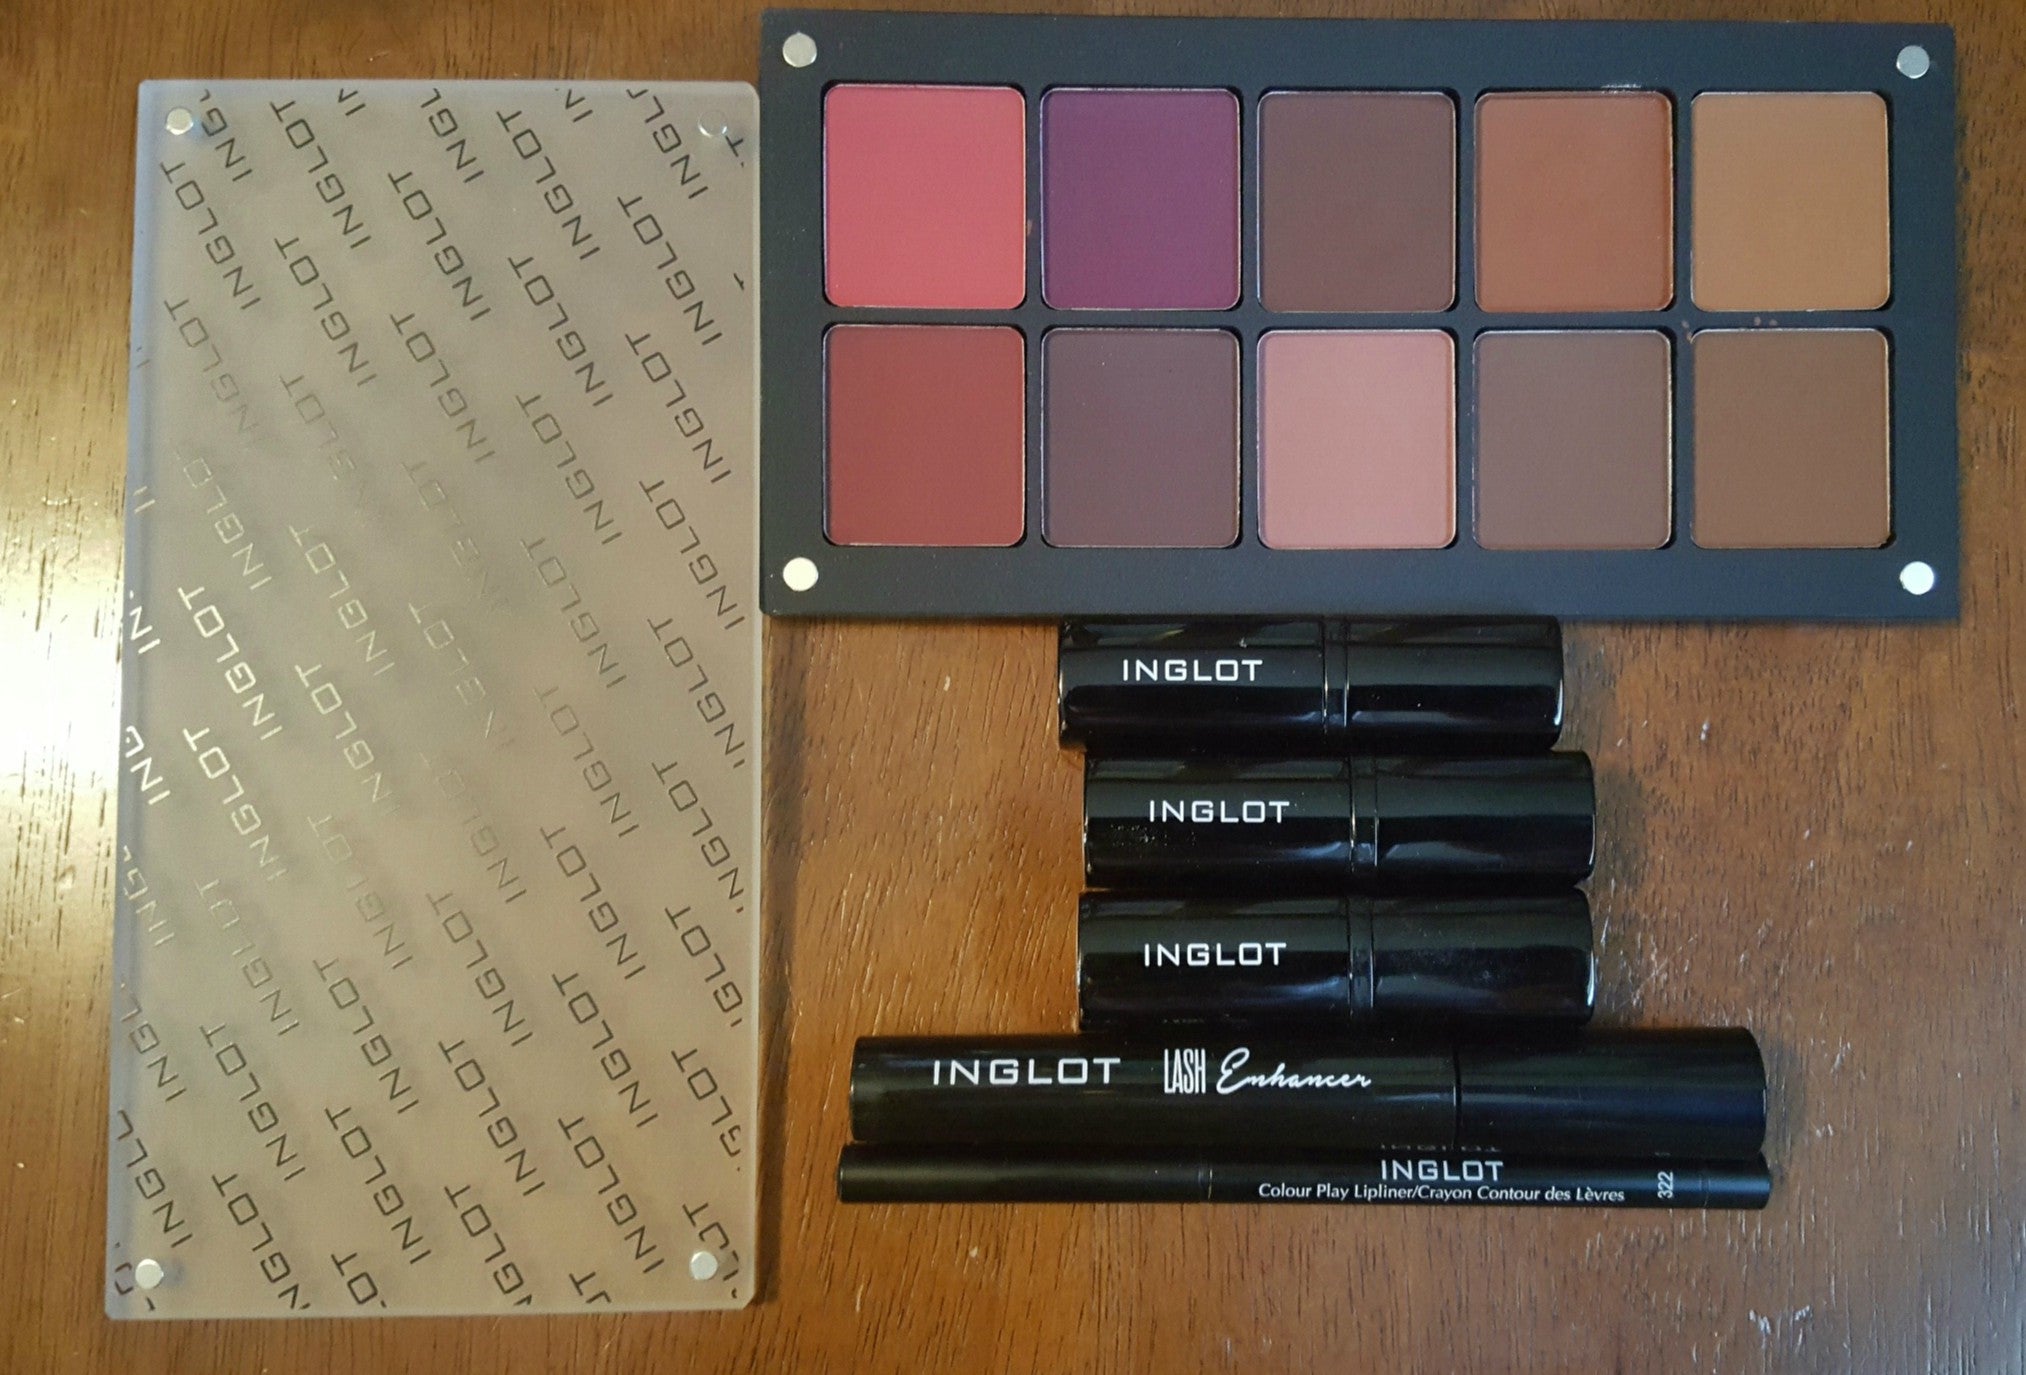 Makeup Product Review, Swatches, Photos, Shades, Trend 2016: Inglot Lash Enhancer, Colour Play Lipliner, Lipstick, Freedom System